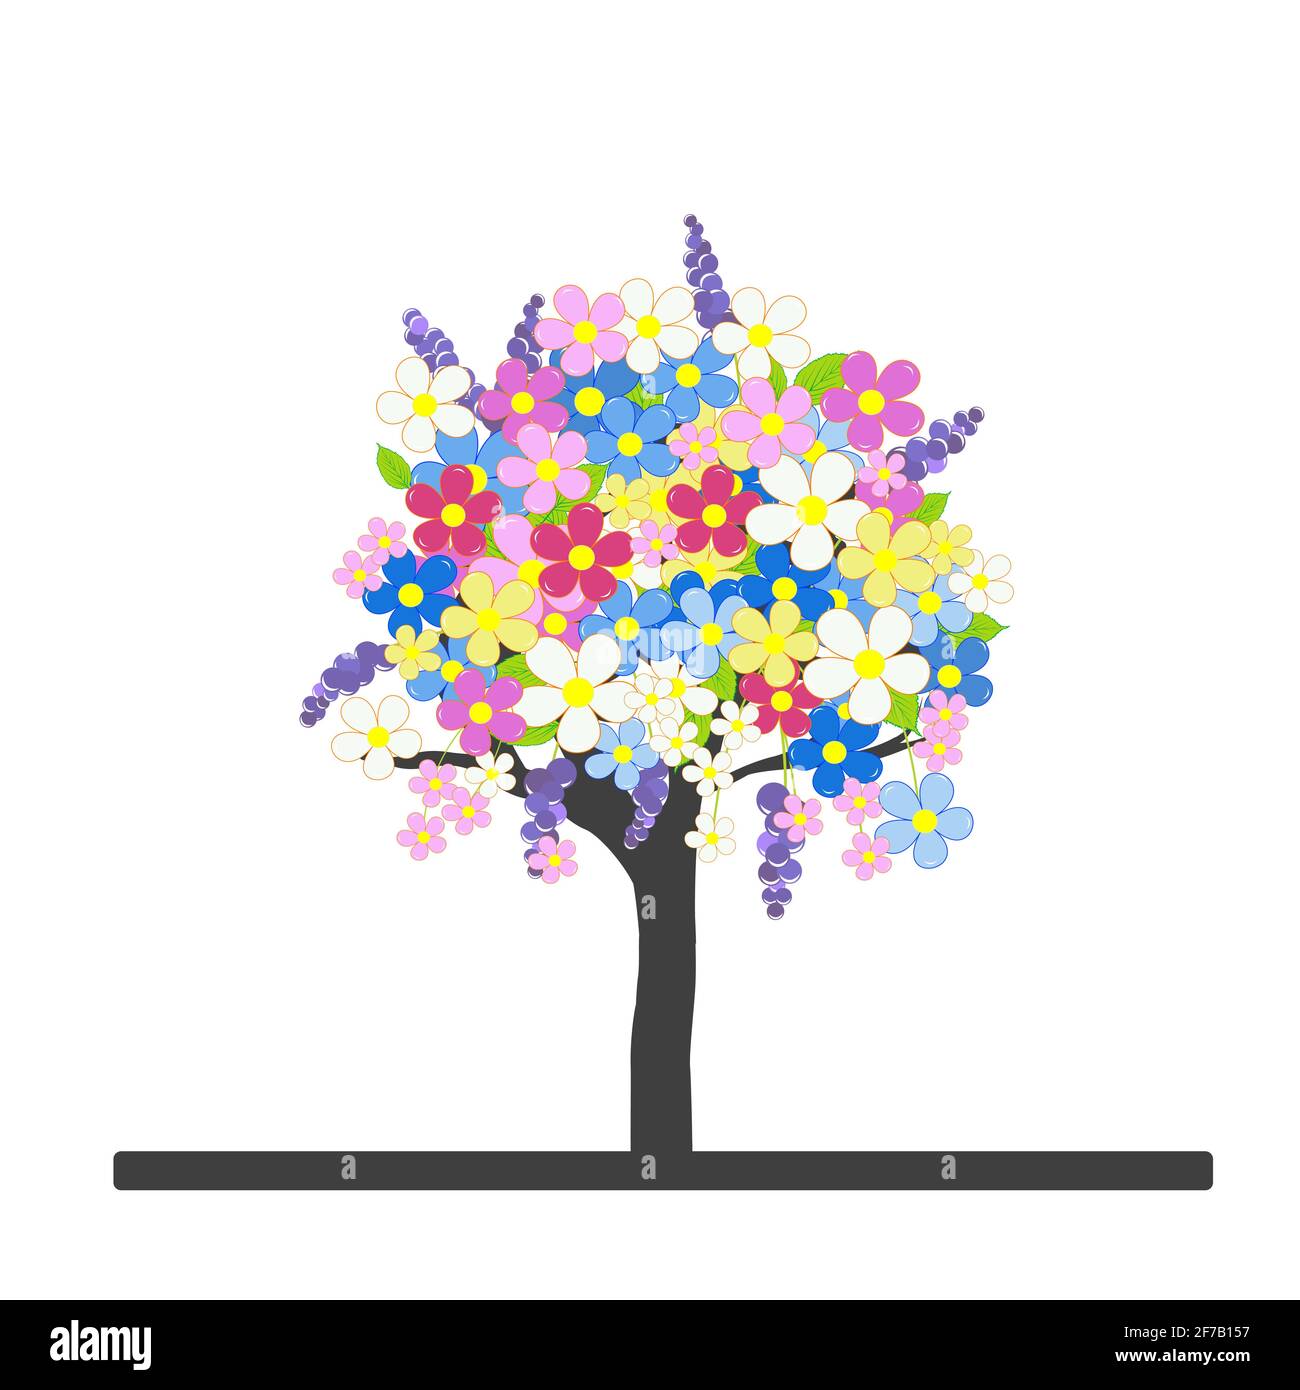 Spring flowering tree with colorful blossom Stock Vector